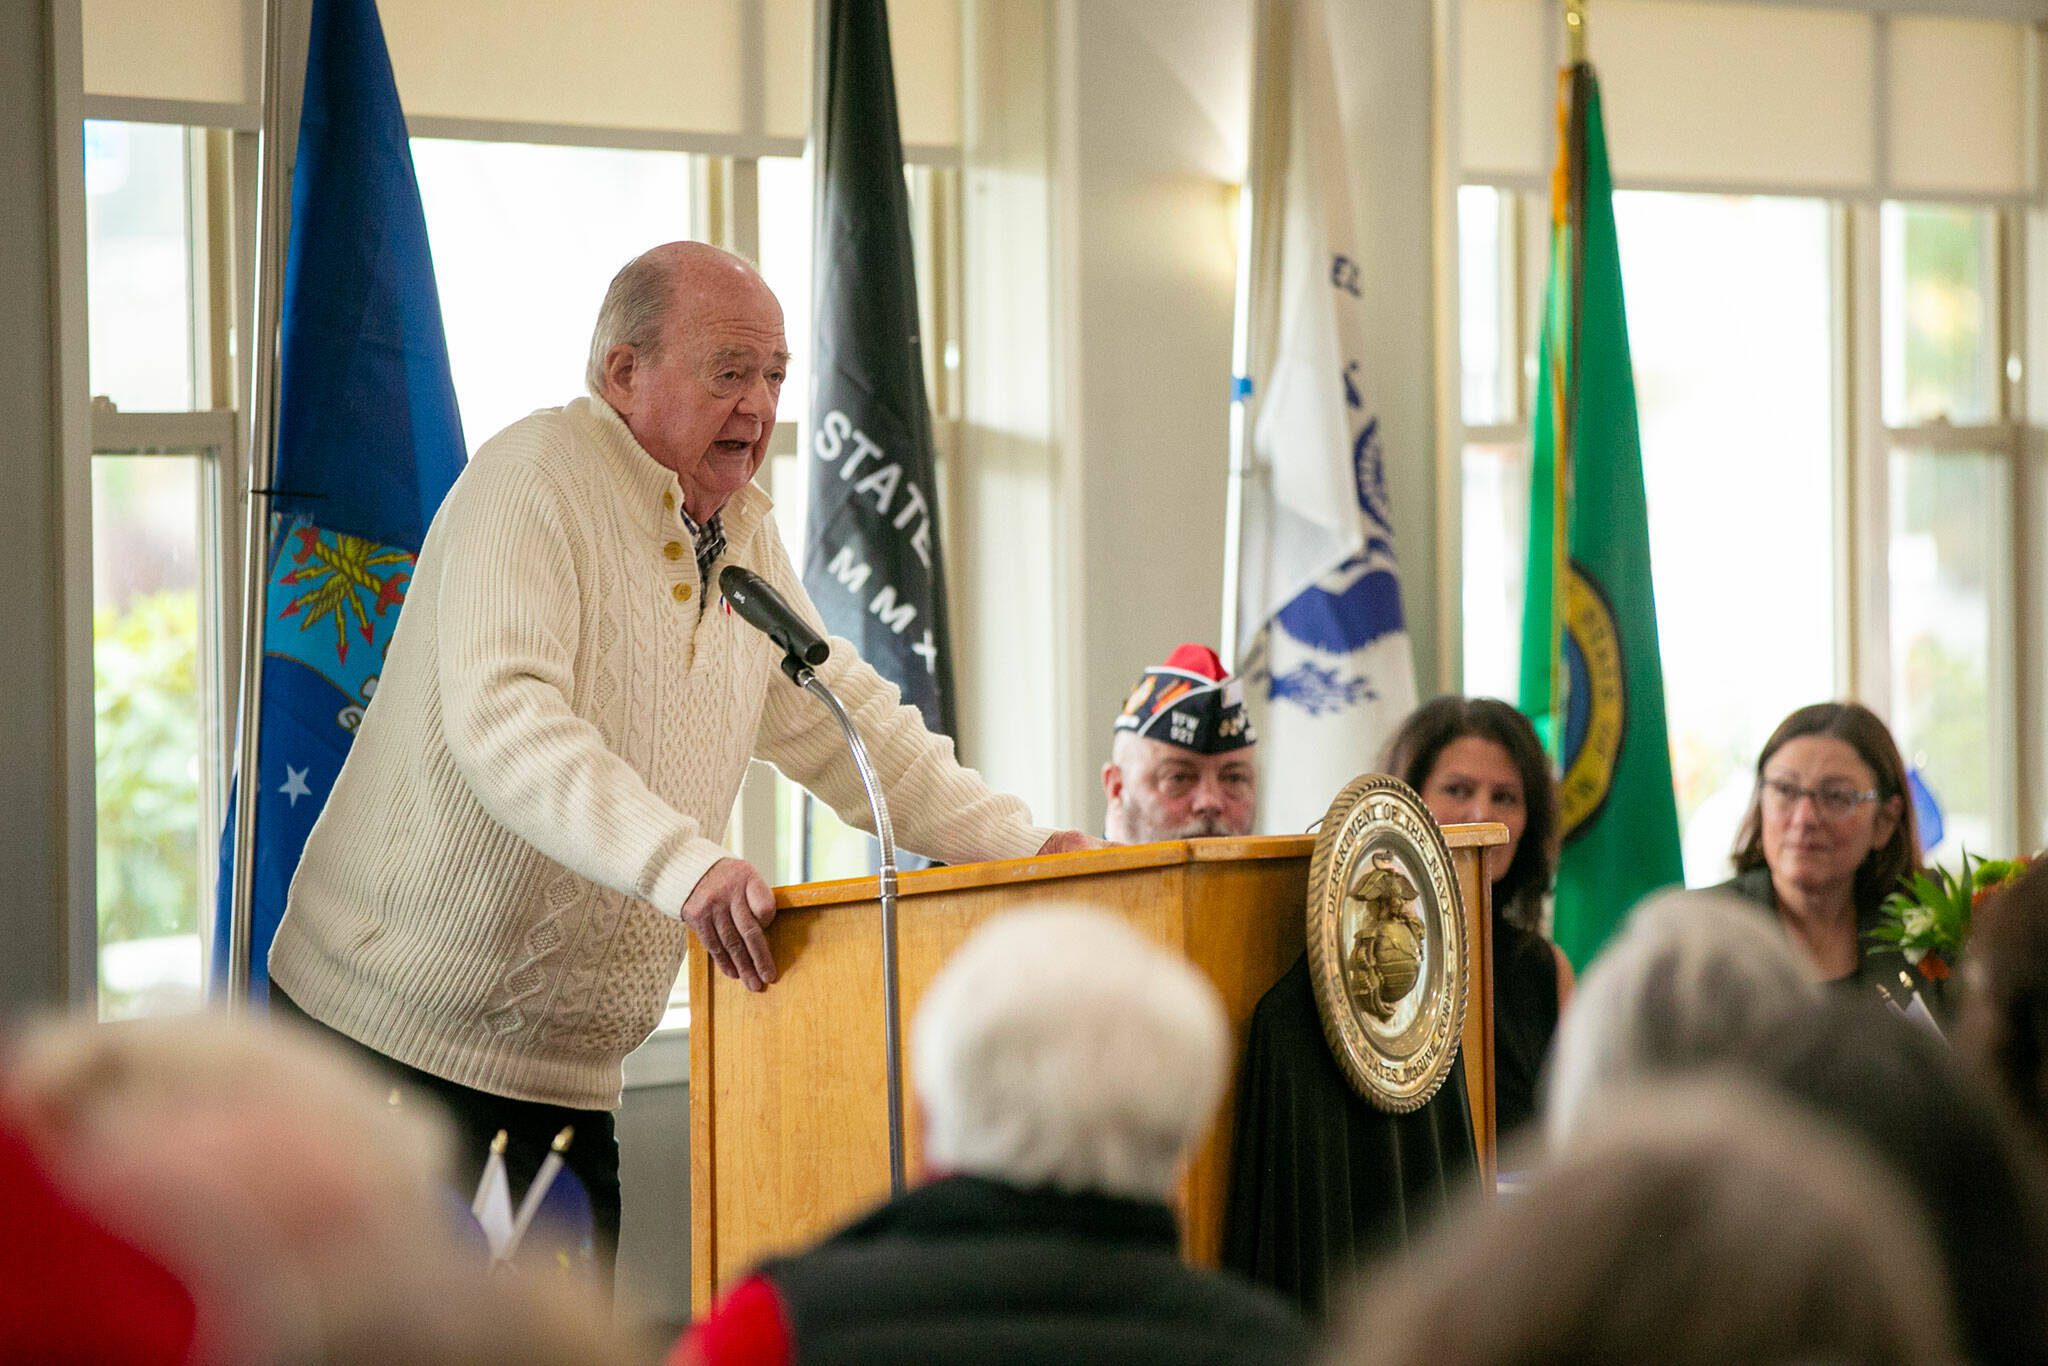 U.S. Army veteran George Michael Taylor shares his stories from the Vietnam War during a Veterans Day program at the Snohomish Senior Center on Friday, Nov. 10, 2023, in Snohomish, Washington. (Ryan Berry / The Herald)